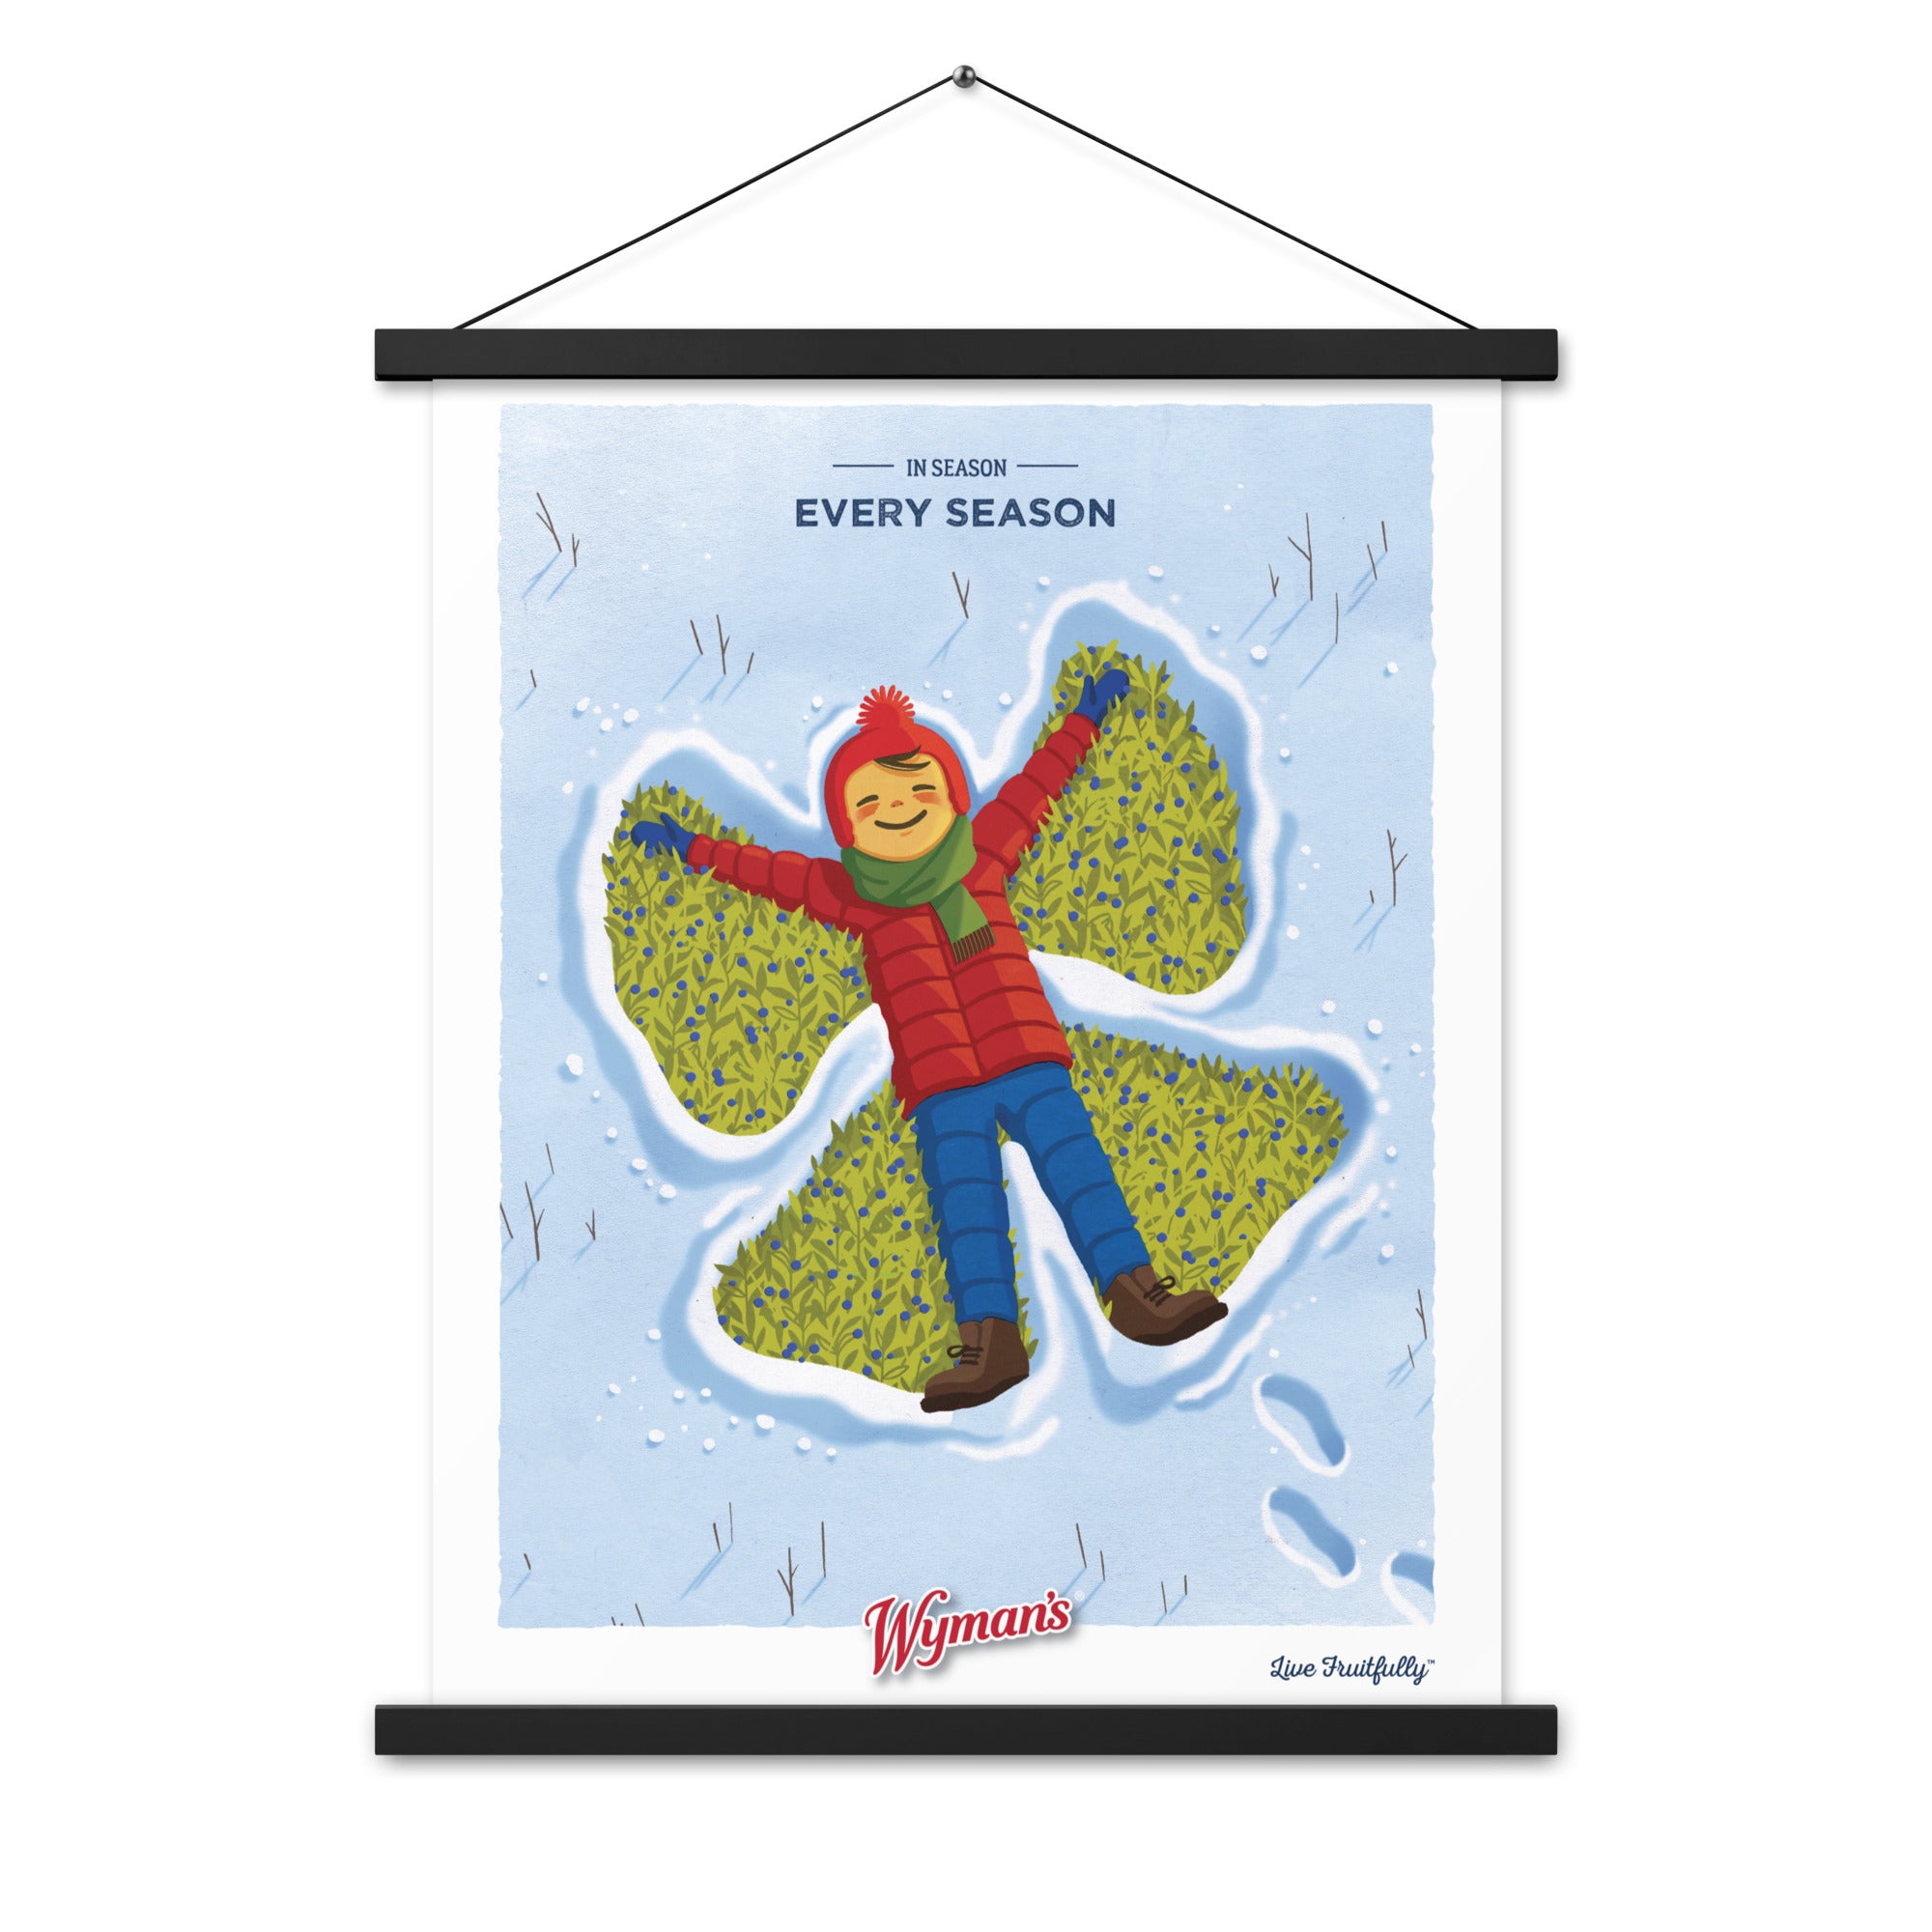 A Shop Wyman's In Season, Every Season Poster with a custom design featuring a picture of a girl holding a snowflake.